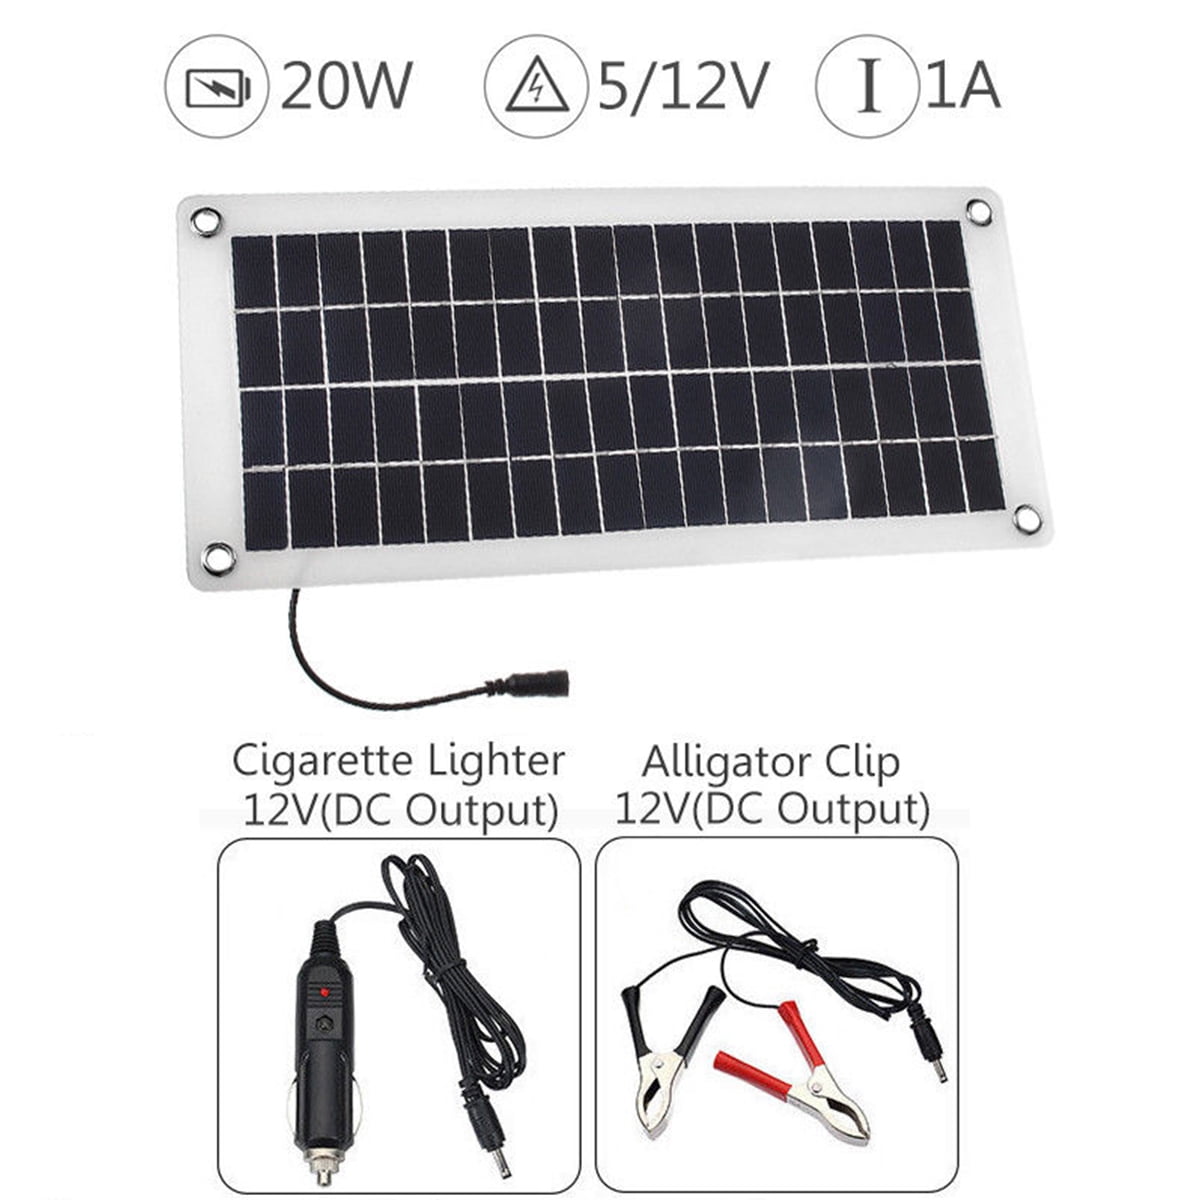 SAE Cable Kits Built-in MPPT Charge Controller 3-Stages Charging 20 Watts Solar Panel Trickle Charger with Adjustable Mount Brackets Sun Energise Waterproof 12V 20W Solar Battery Charger Pro